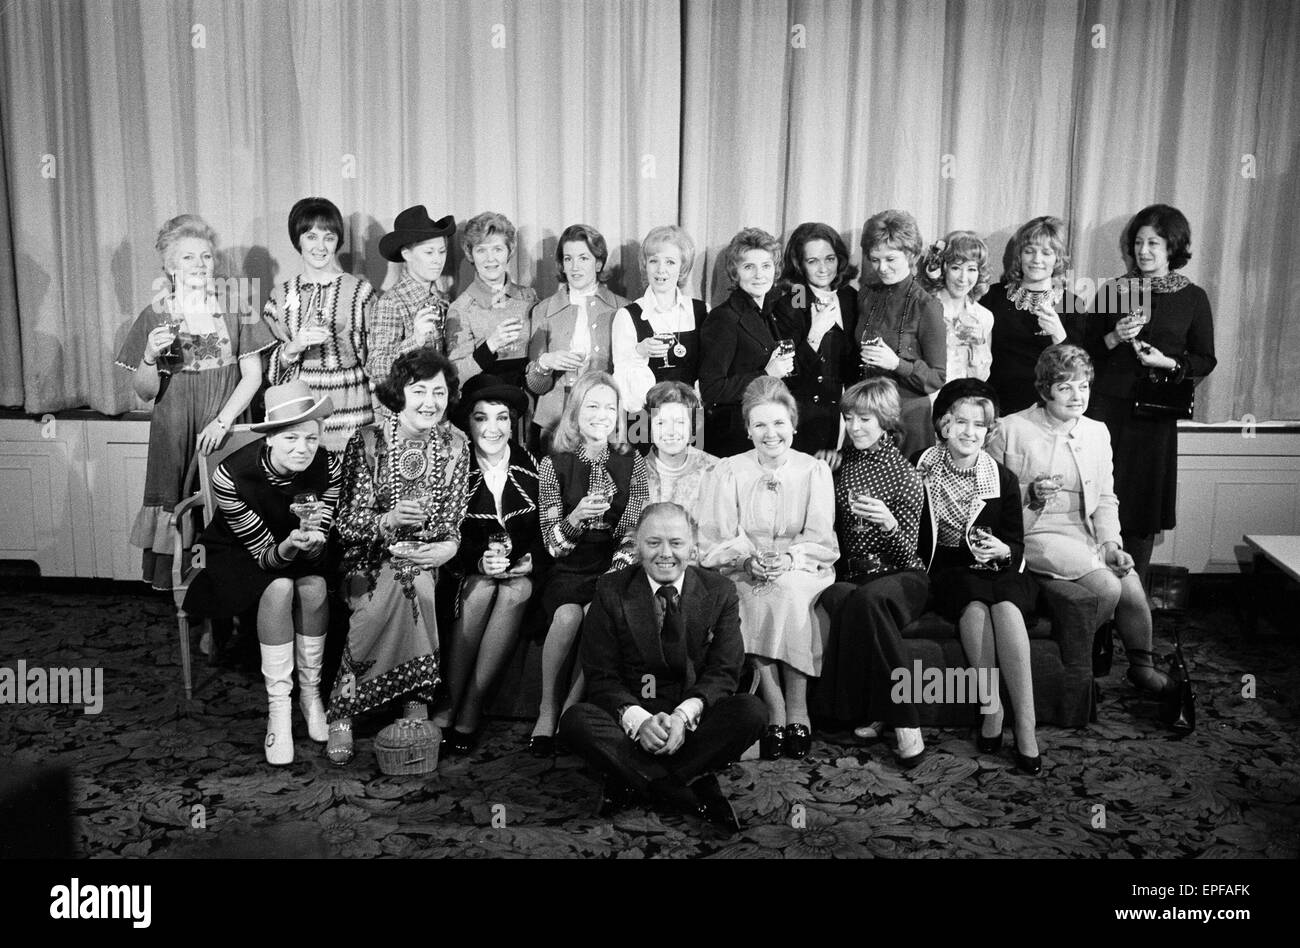 Twenty of the leading ladies from the play 'The Mousetrap' pictured with two of the stars of the original play in 1952, Richard Attenborough and his wife Sheila Sim. Picture taken 25th November 1973. Stock Photo